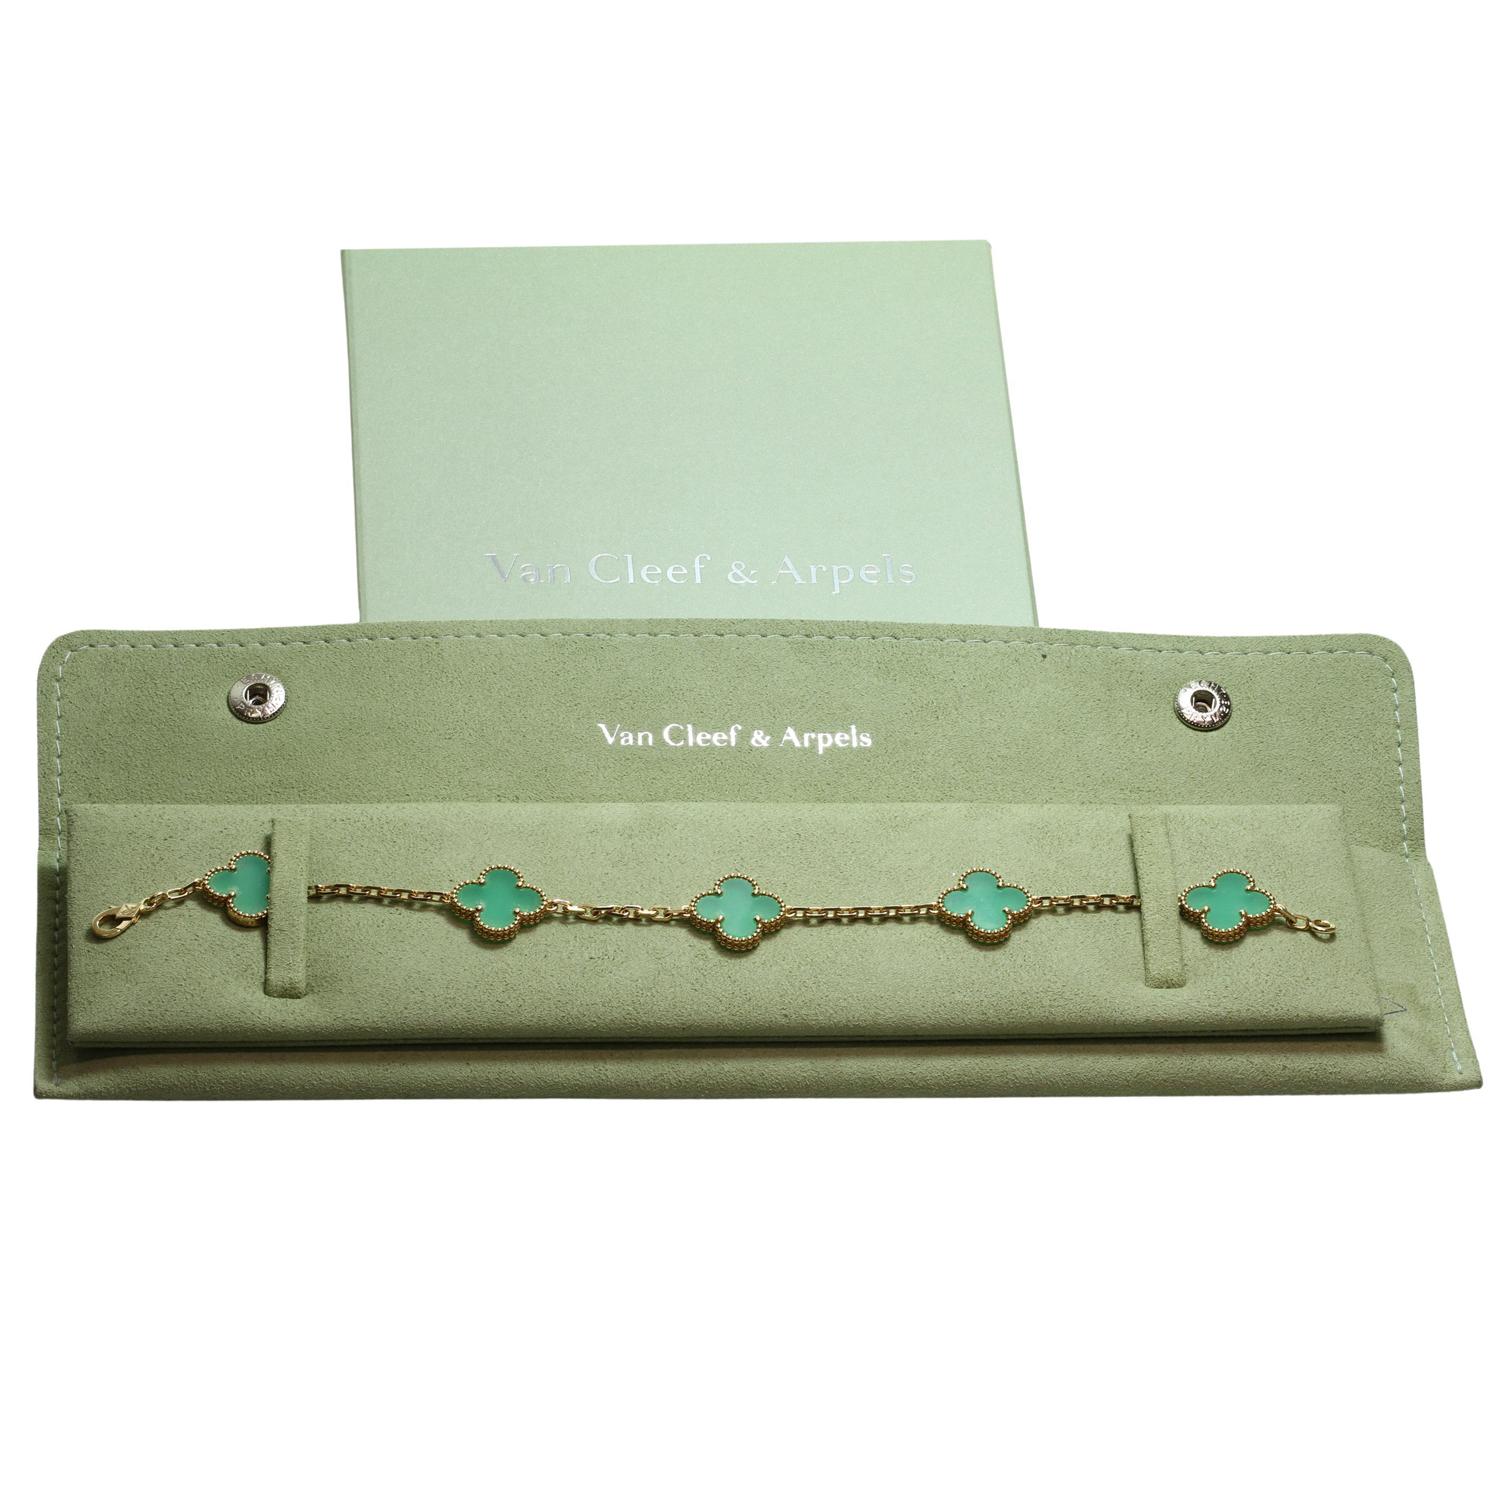 This rare Van Cleef & Arpels bracelet from the iconic Vintage Alhambra collection features 5 lucky clover charms crafted in 18k yellow gold and set with green chrysoprase.  This discontinued and special order bracelet comes with a certificate of